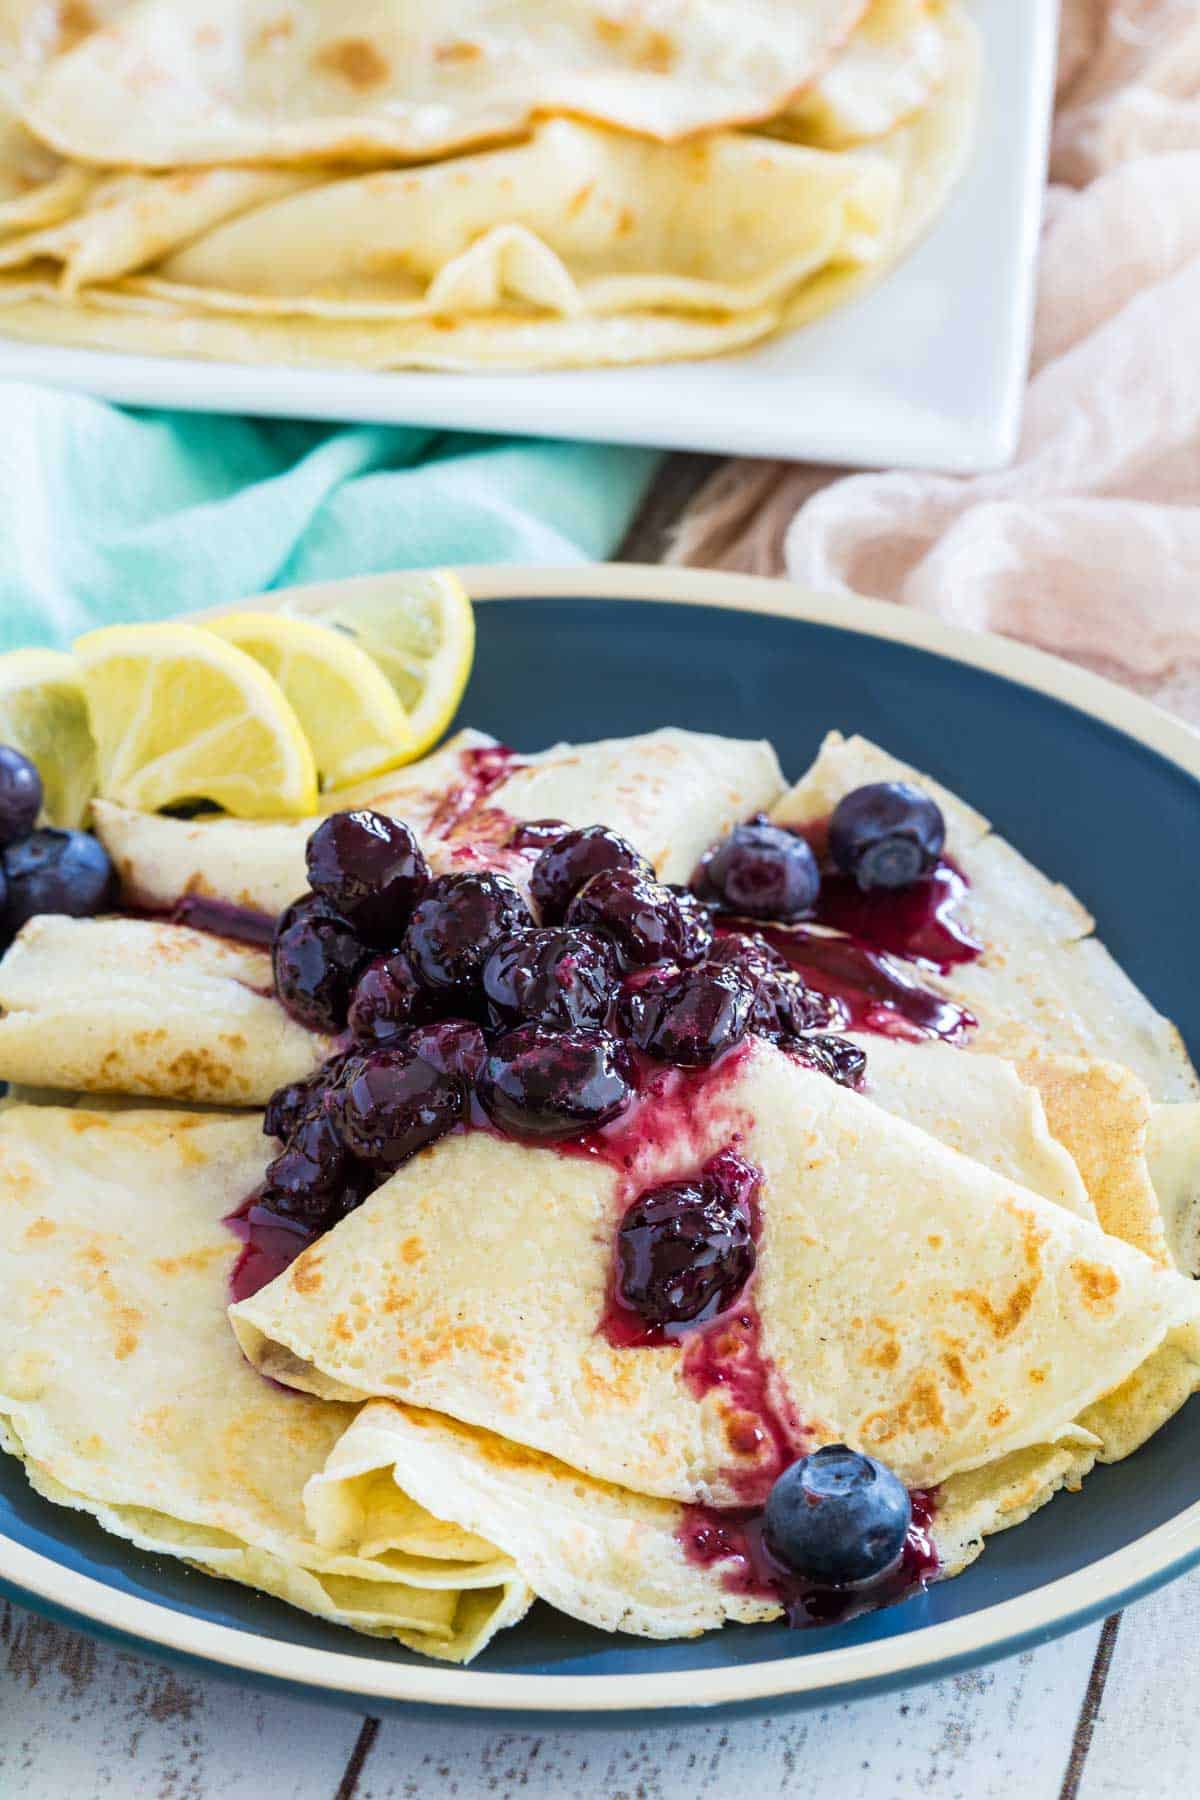 A pile of blueberry crepes on a plate with more crepes on a serving platter in the background